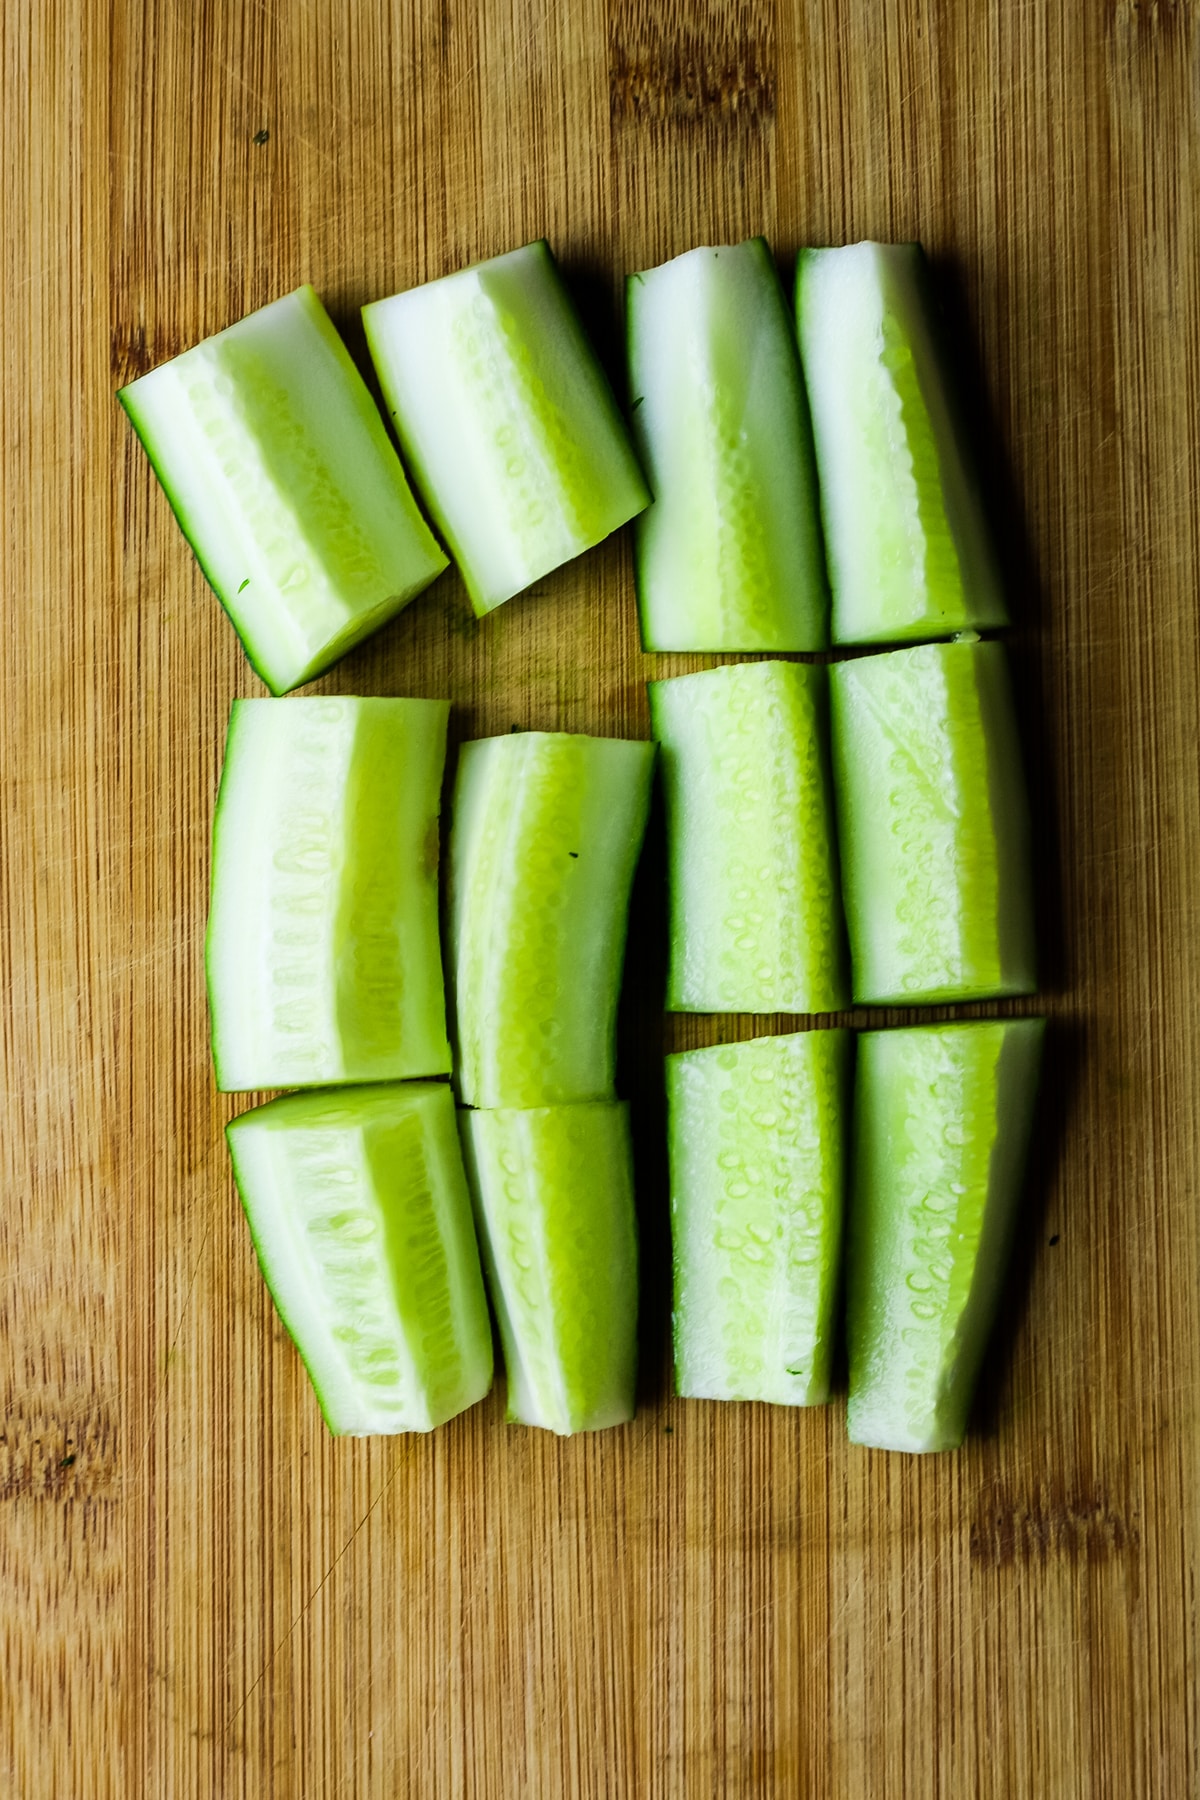 cut cucumbers lengthwise on a wooden cutting board.